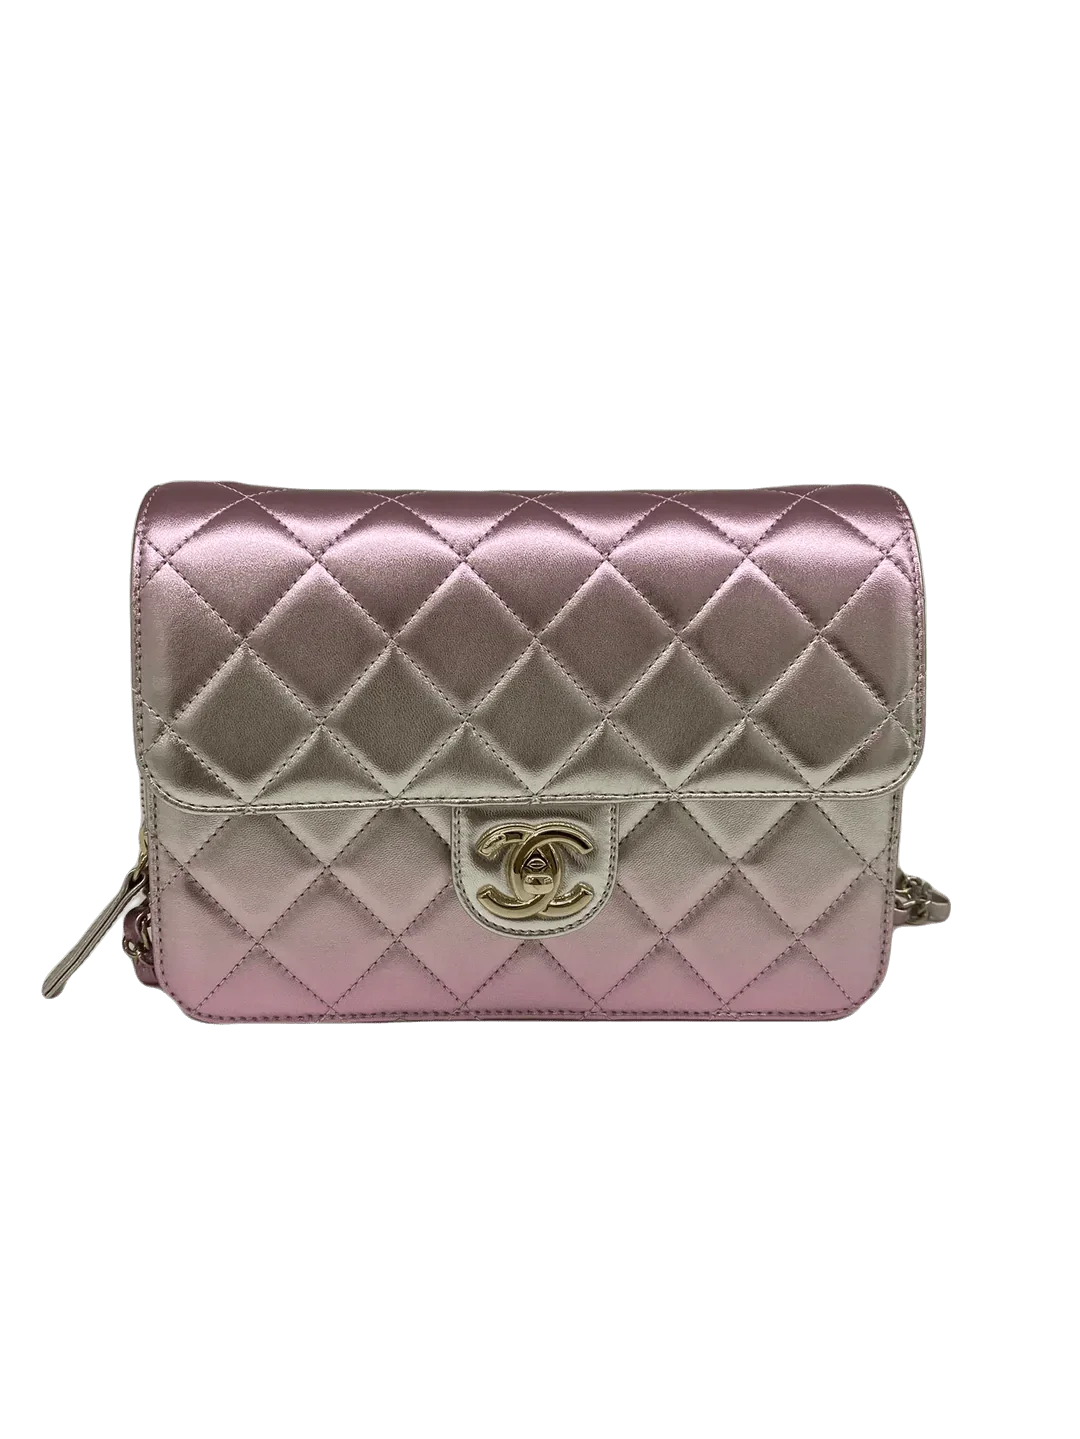 Image of Chanel Large Like A Wallet Metallic Pink